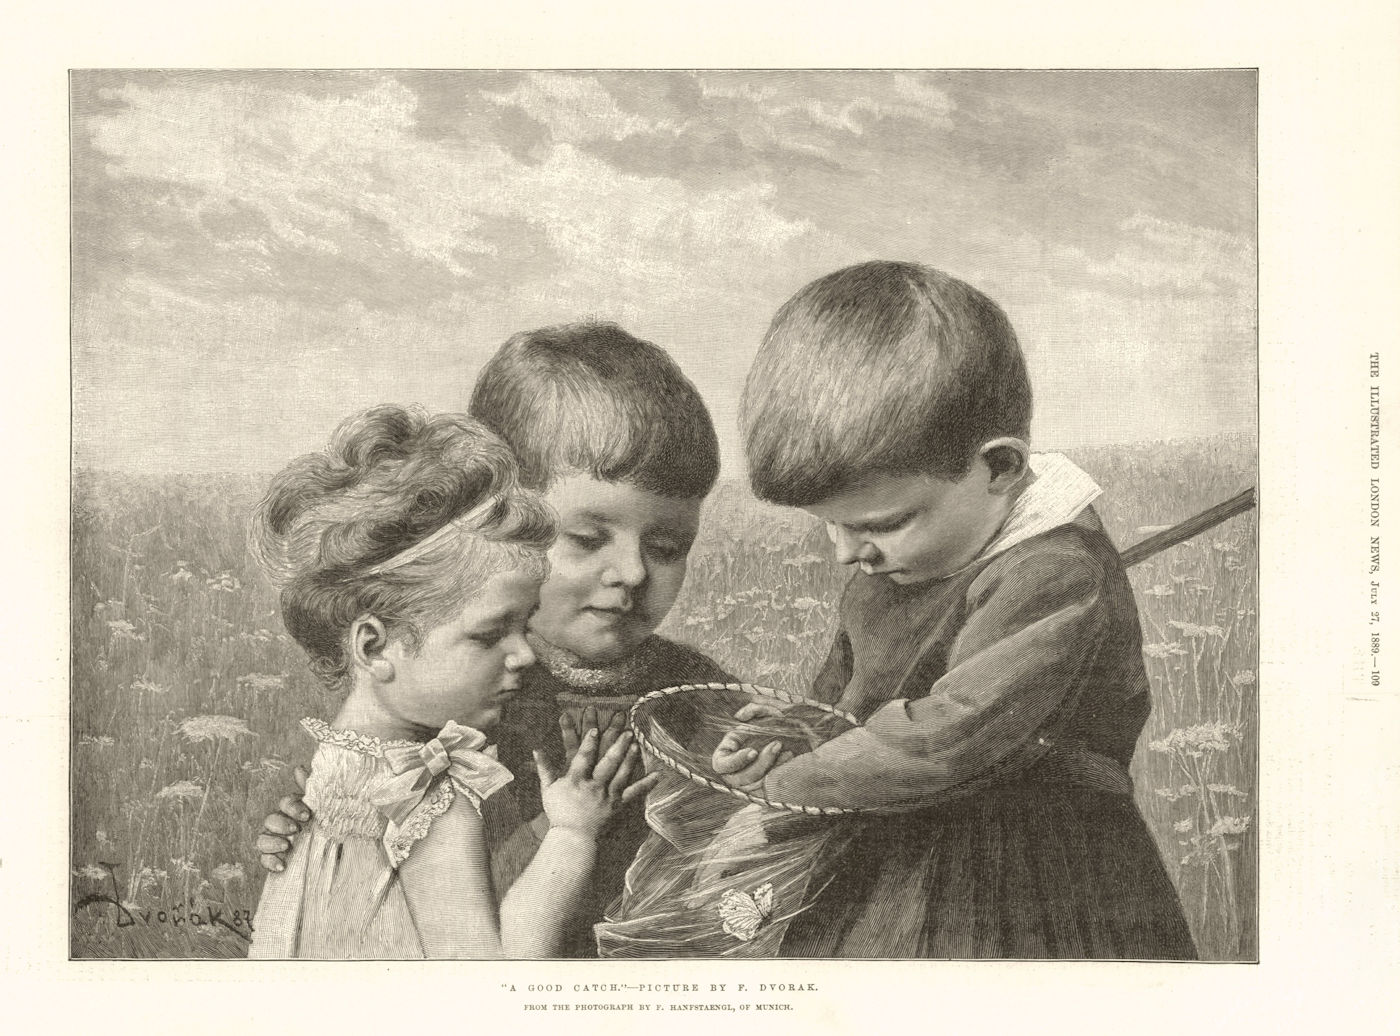 Associate Product "A good catch". Children. Butterfly net 1889 antique ILN full page print